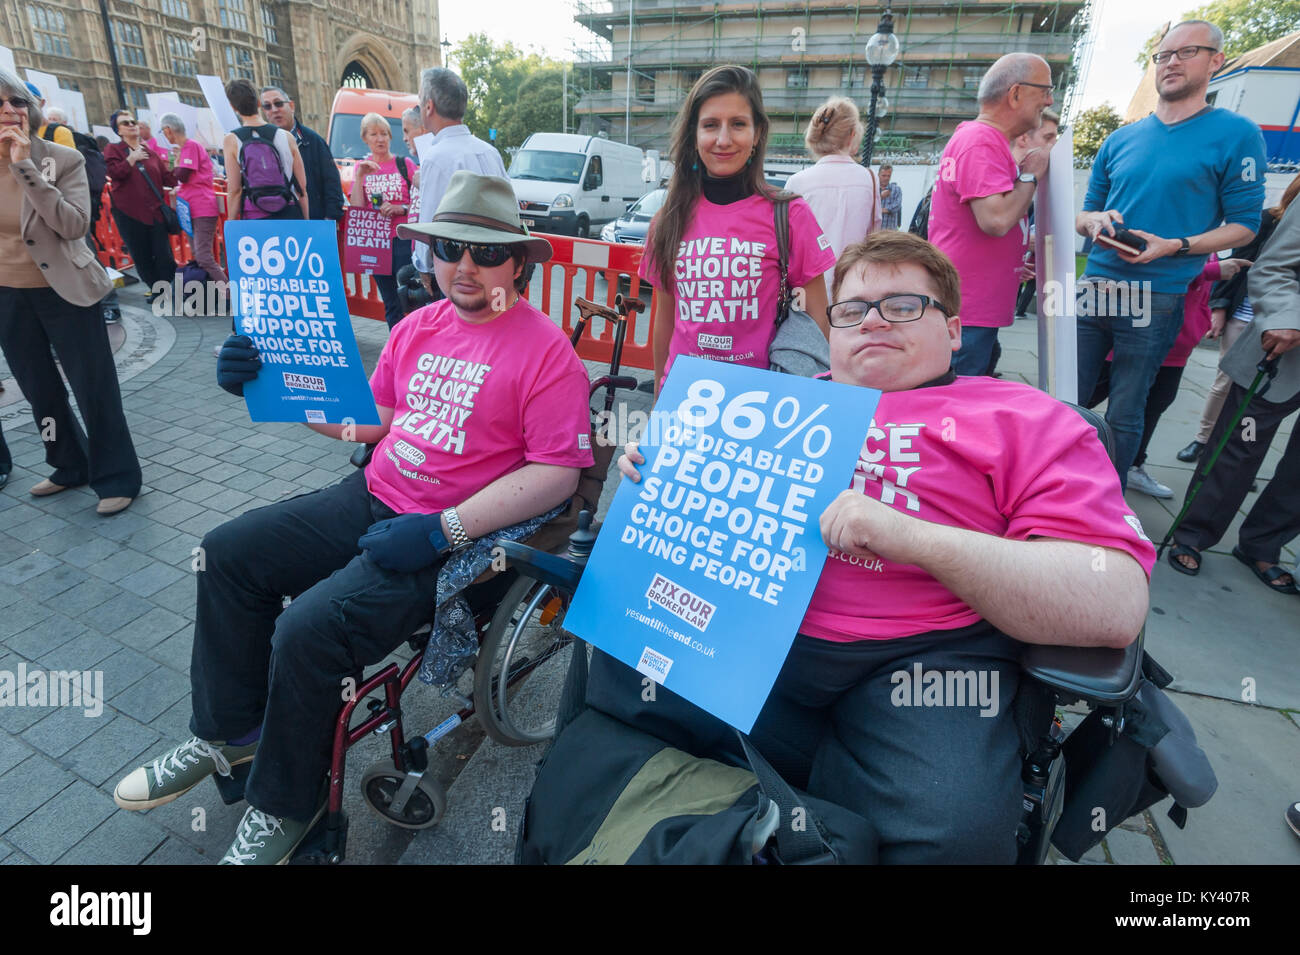 Disabled supporters of the Assisted Suicide Bill being debated in Parliament claim that 86% of disabled people support the bill. But many disabled groups oppose it. Stock Photo